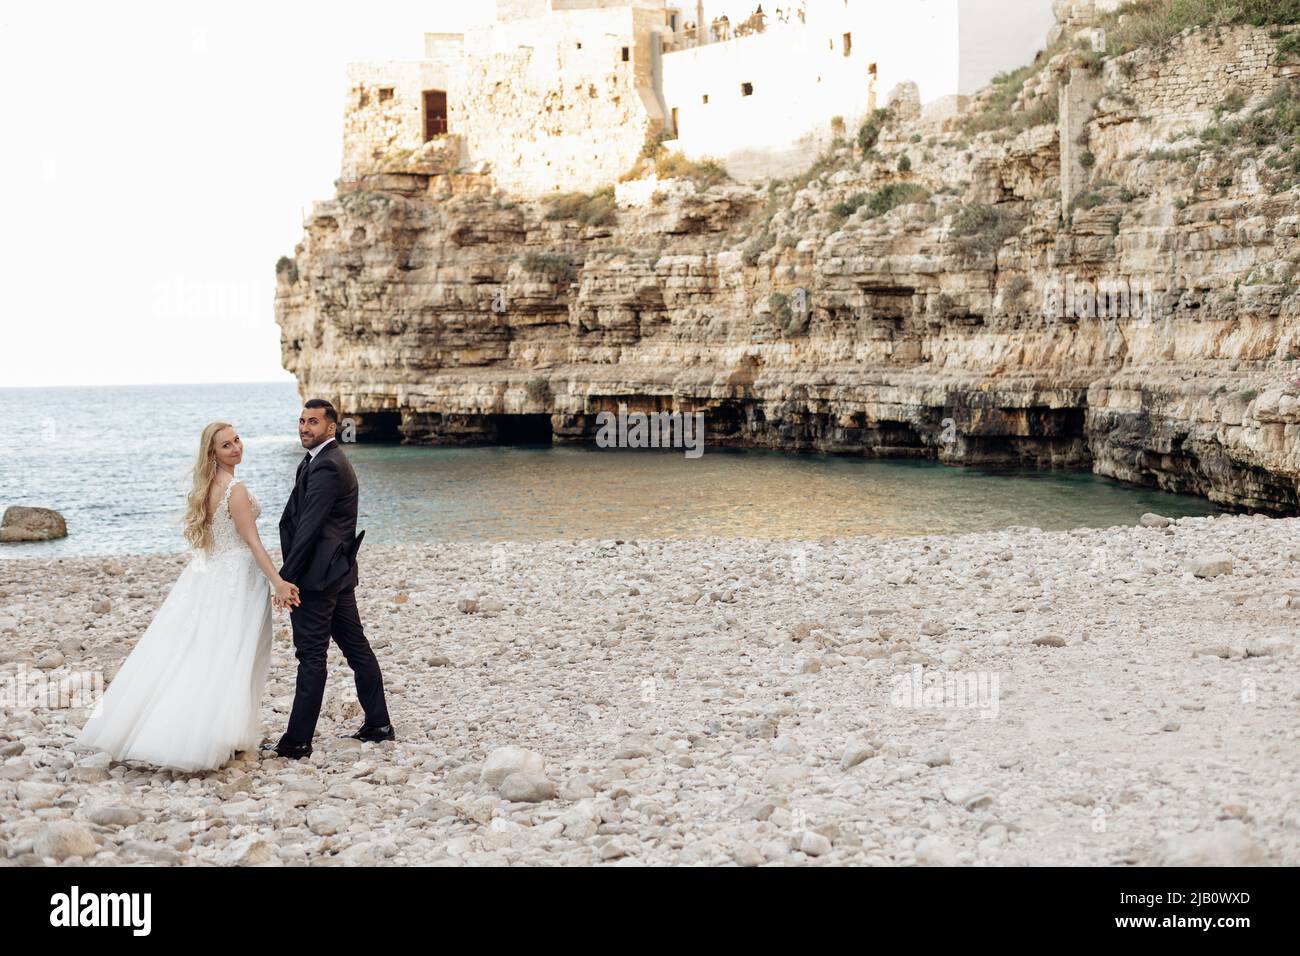 Married couple in wedding dress, official suit standing on the beach near sea. Travelling abroad in Italy, new beginning Stock Photo